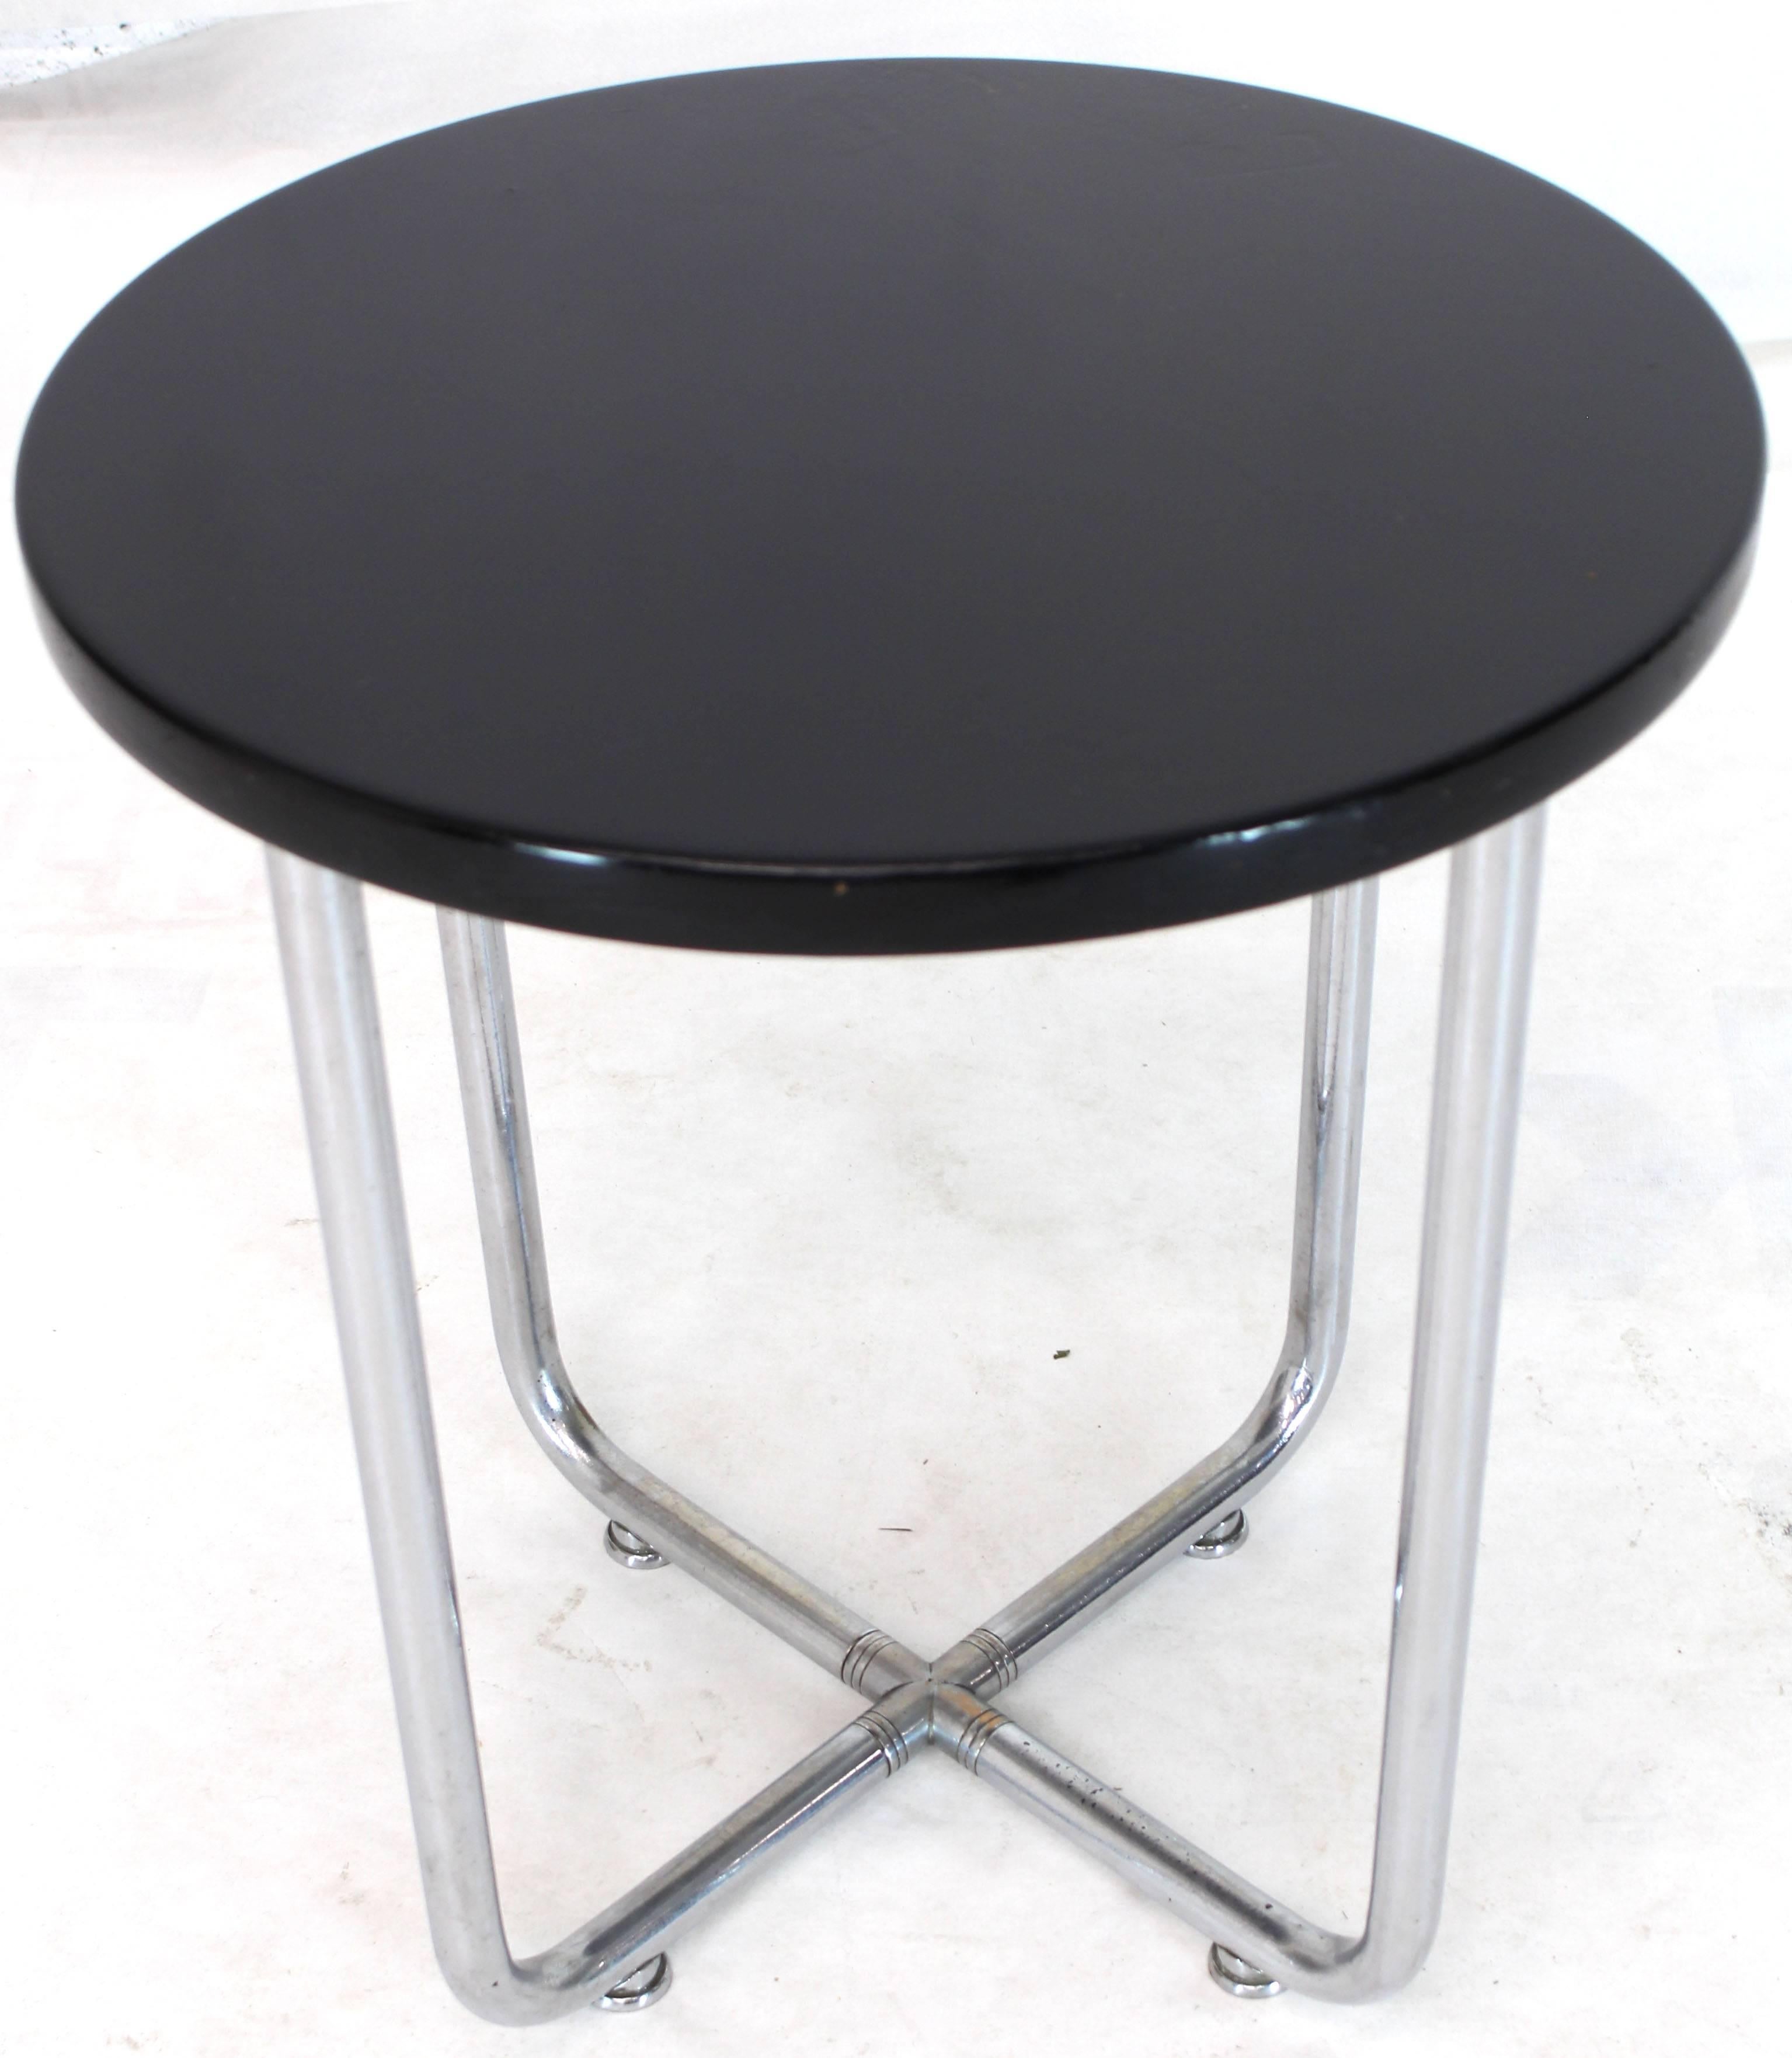 20th Century Josef Hofmann Art Deco Bauhaus Round Side Occasional Table Stand For Sale